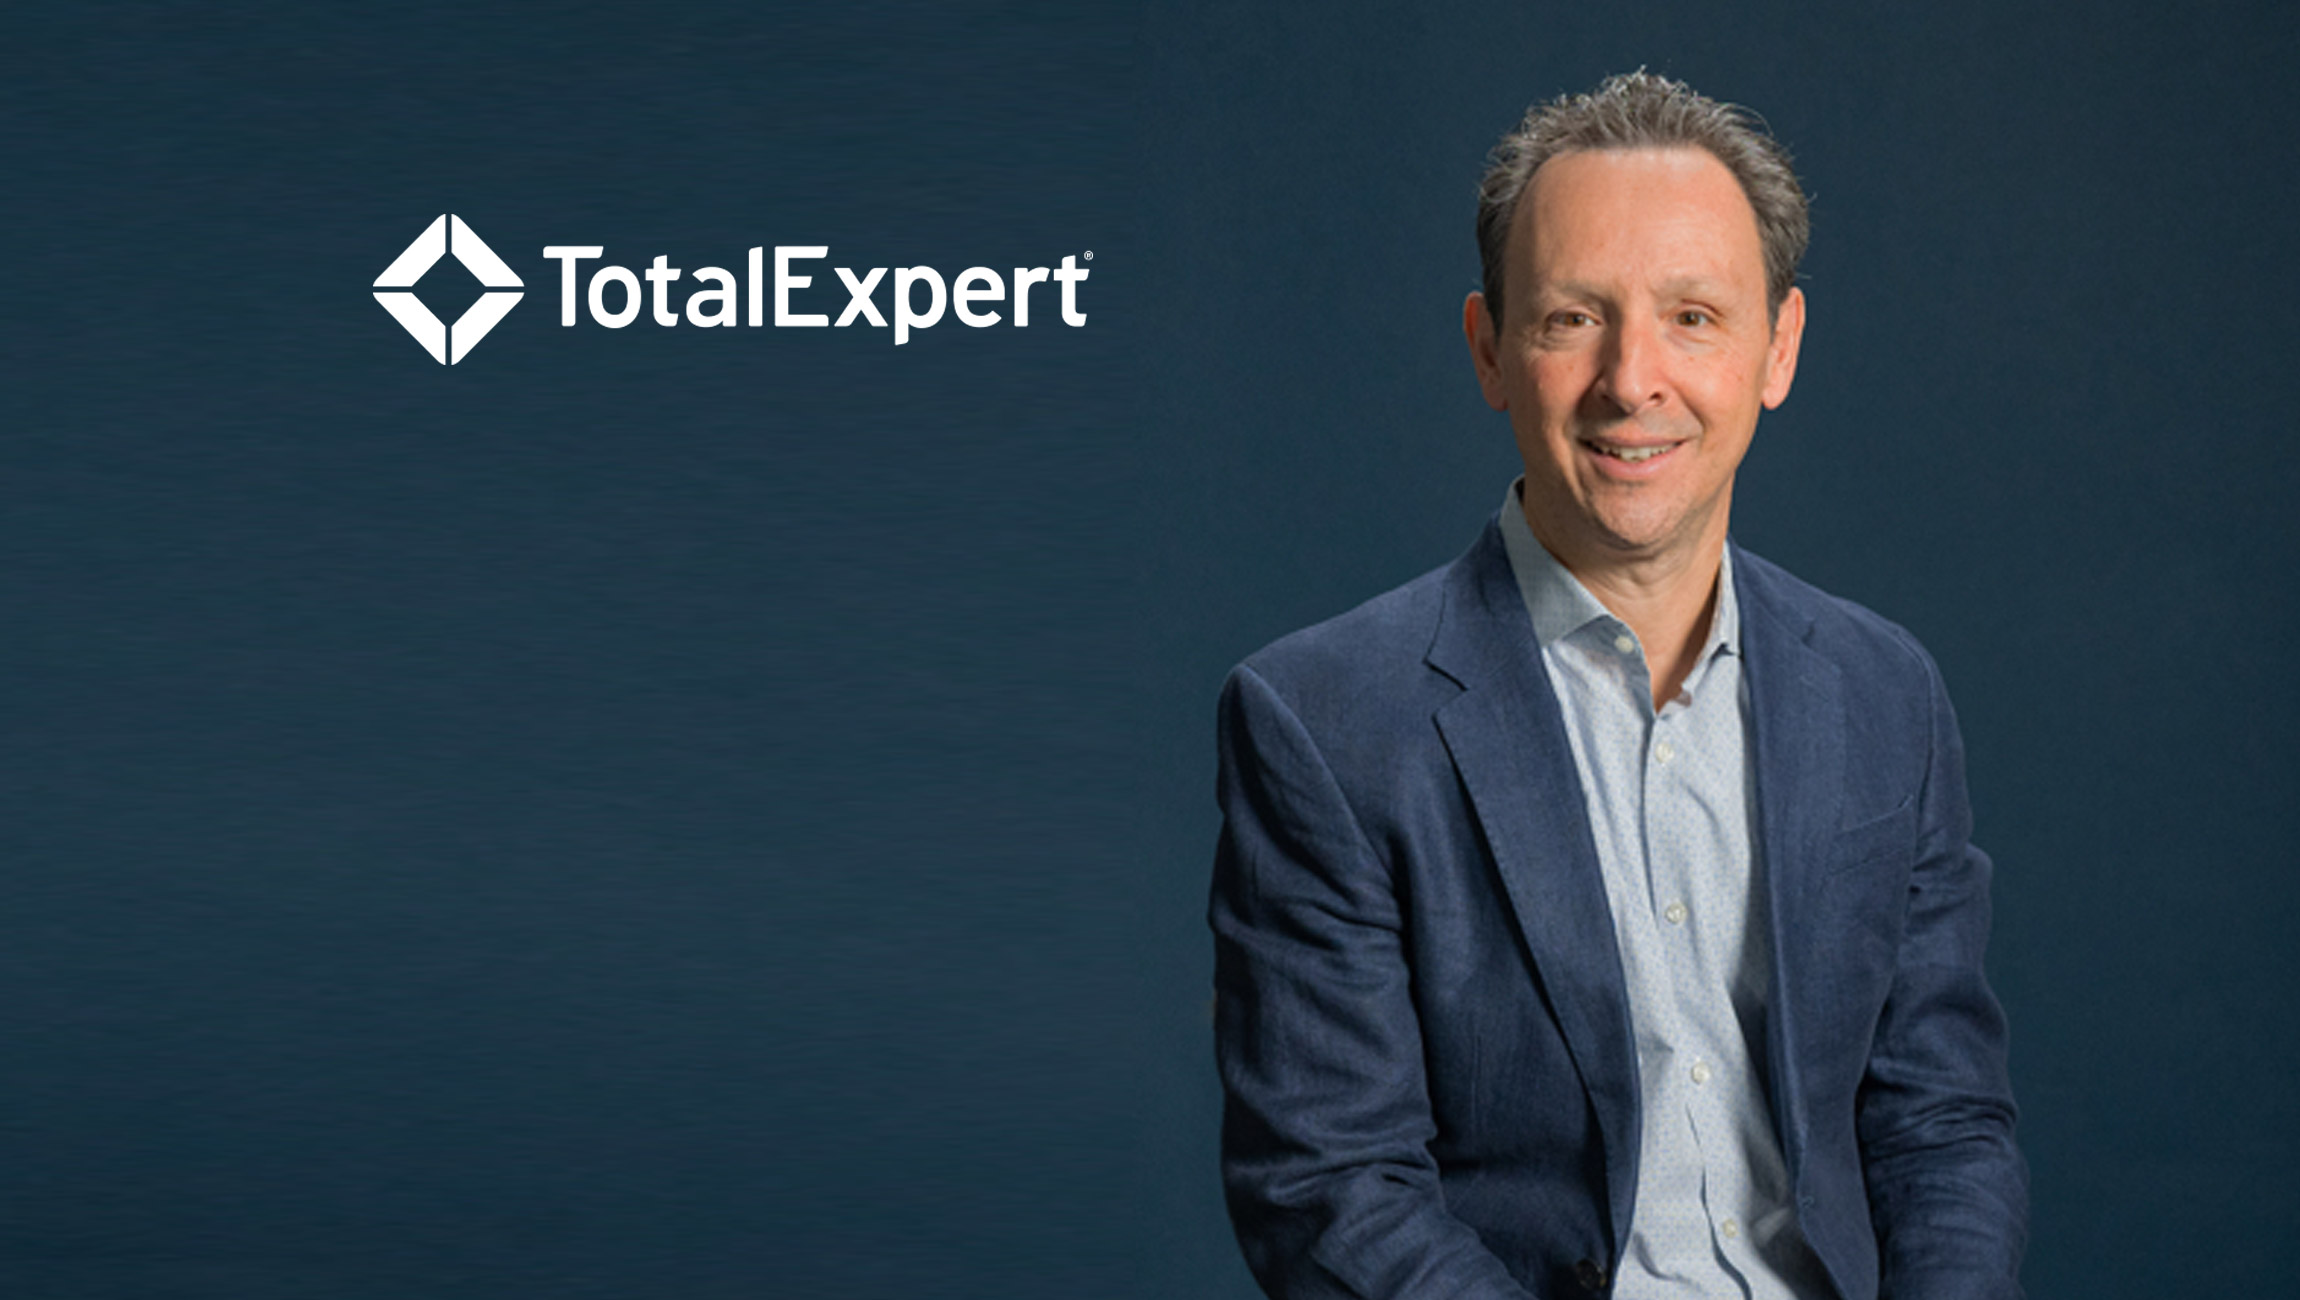 Total Expert Welcomes Tony Barbone as Chief Revenue Officer